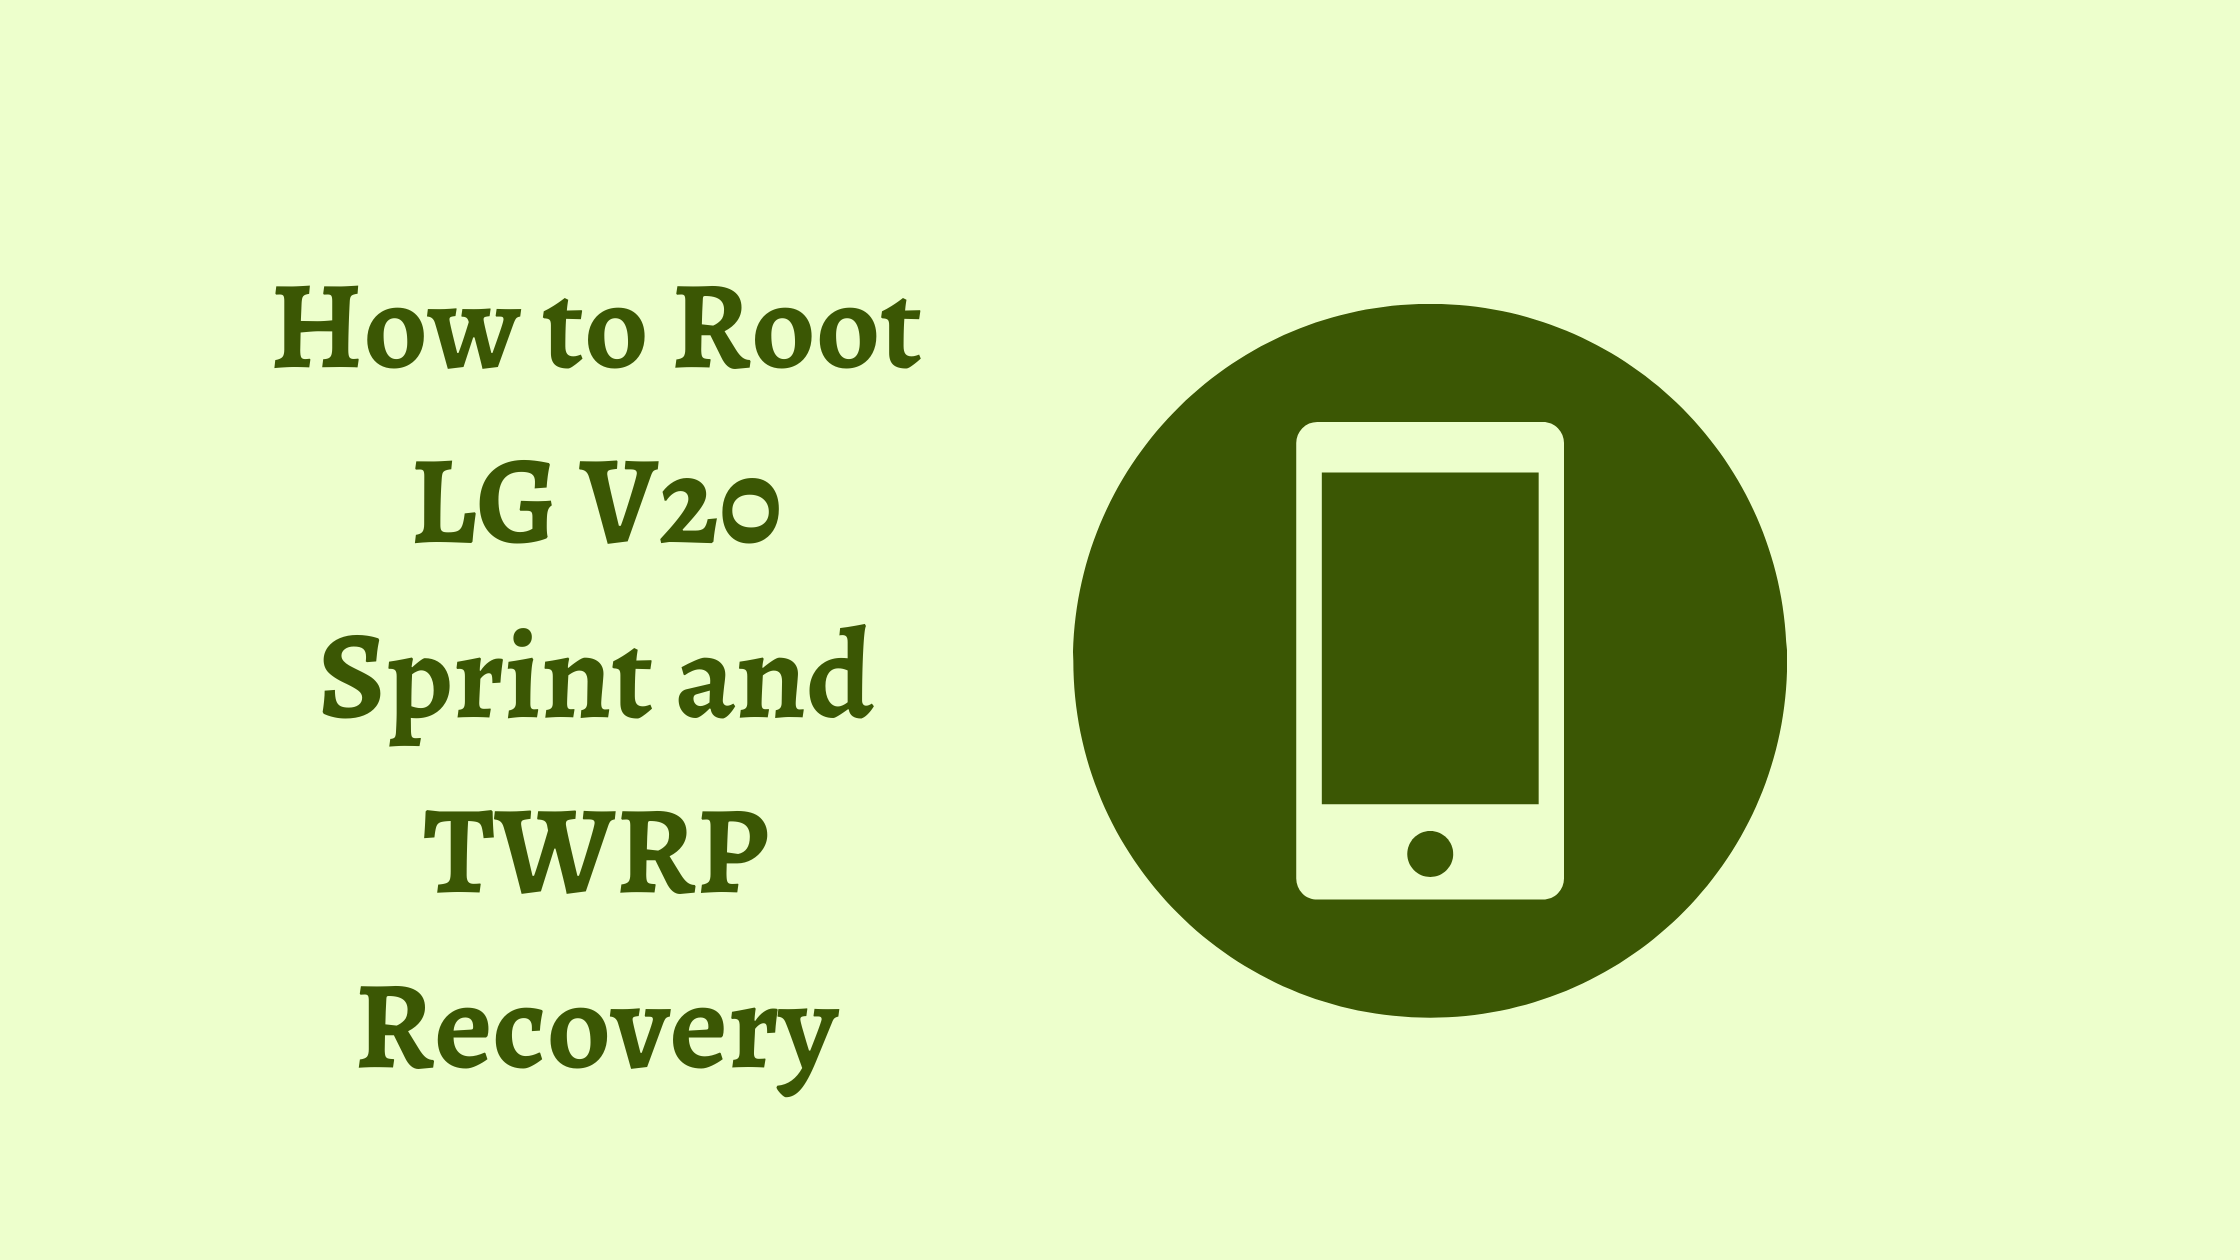 How to Root LG V20 Sprint and TWRP Recovery